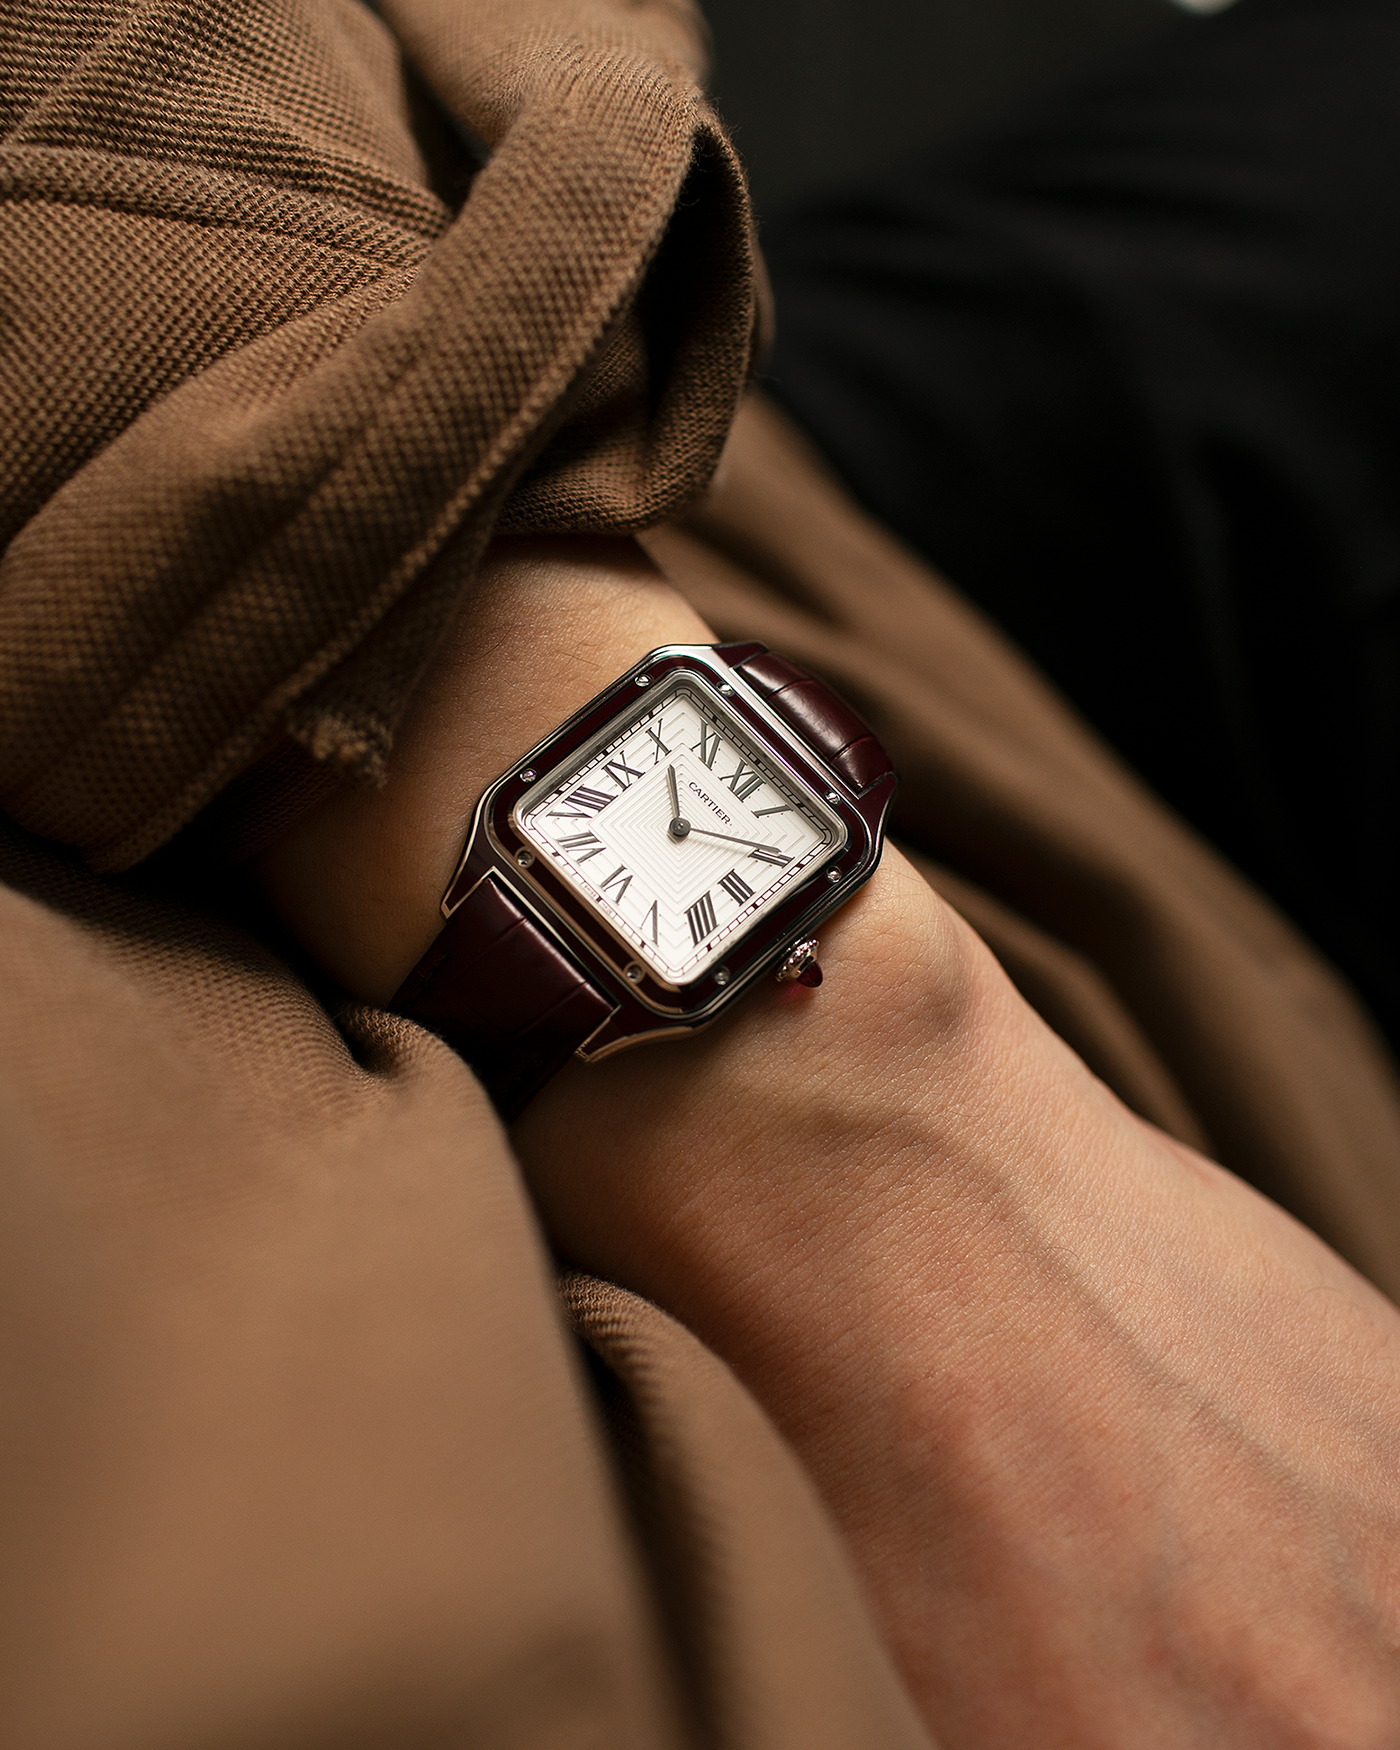 Brand: Cartier Year: 2022 Model: Santos-Dumont Large Limited Edition of 150 pieces Material: Platinum, Burgundy Lacquer Movement: Cartier Cal. 430 MC, Manual-Winding Case Diameter: 43.5mm x 31.4mm Bracelet / Strap: Cartier Burgundy Alligator Leather Strap with Signed Platinum Tang Buckle